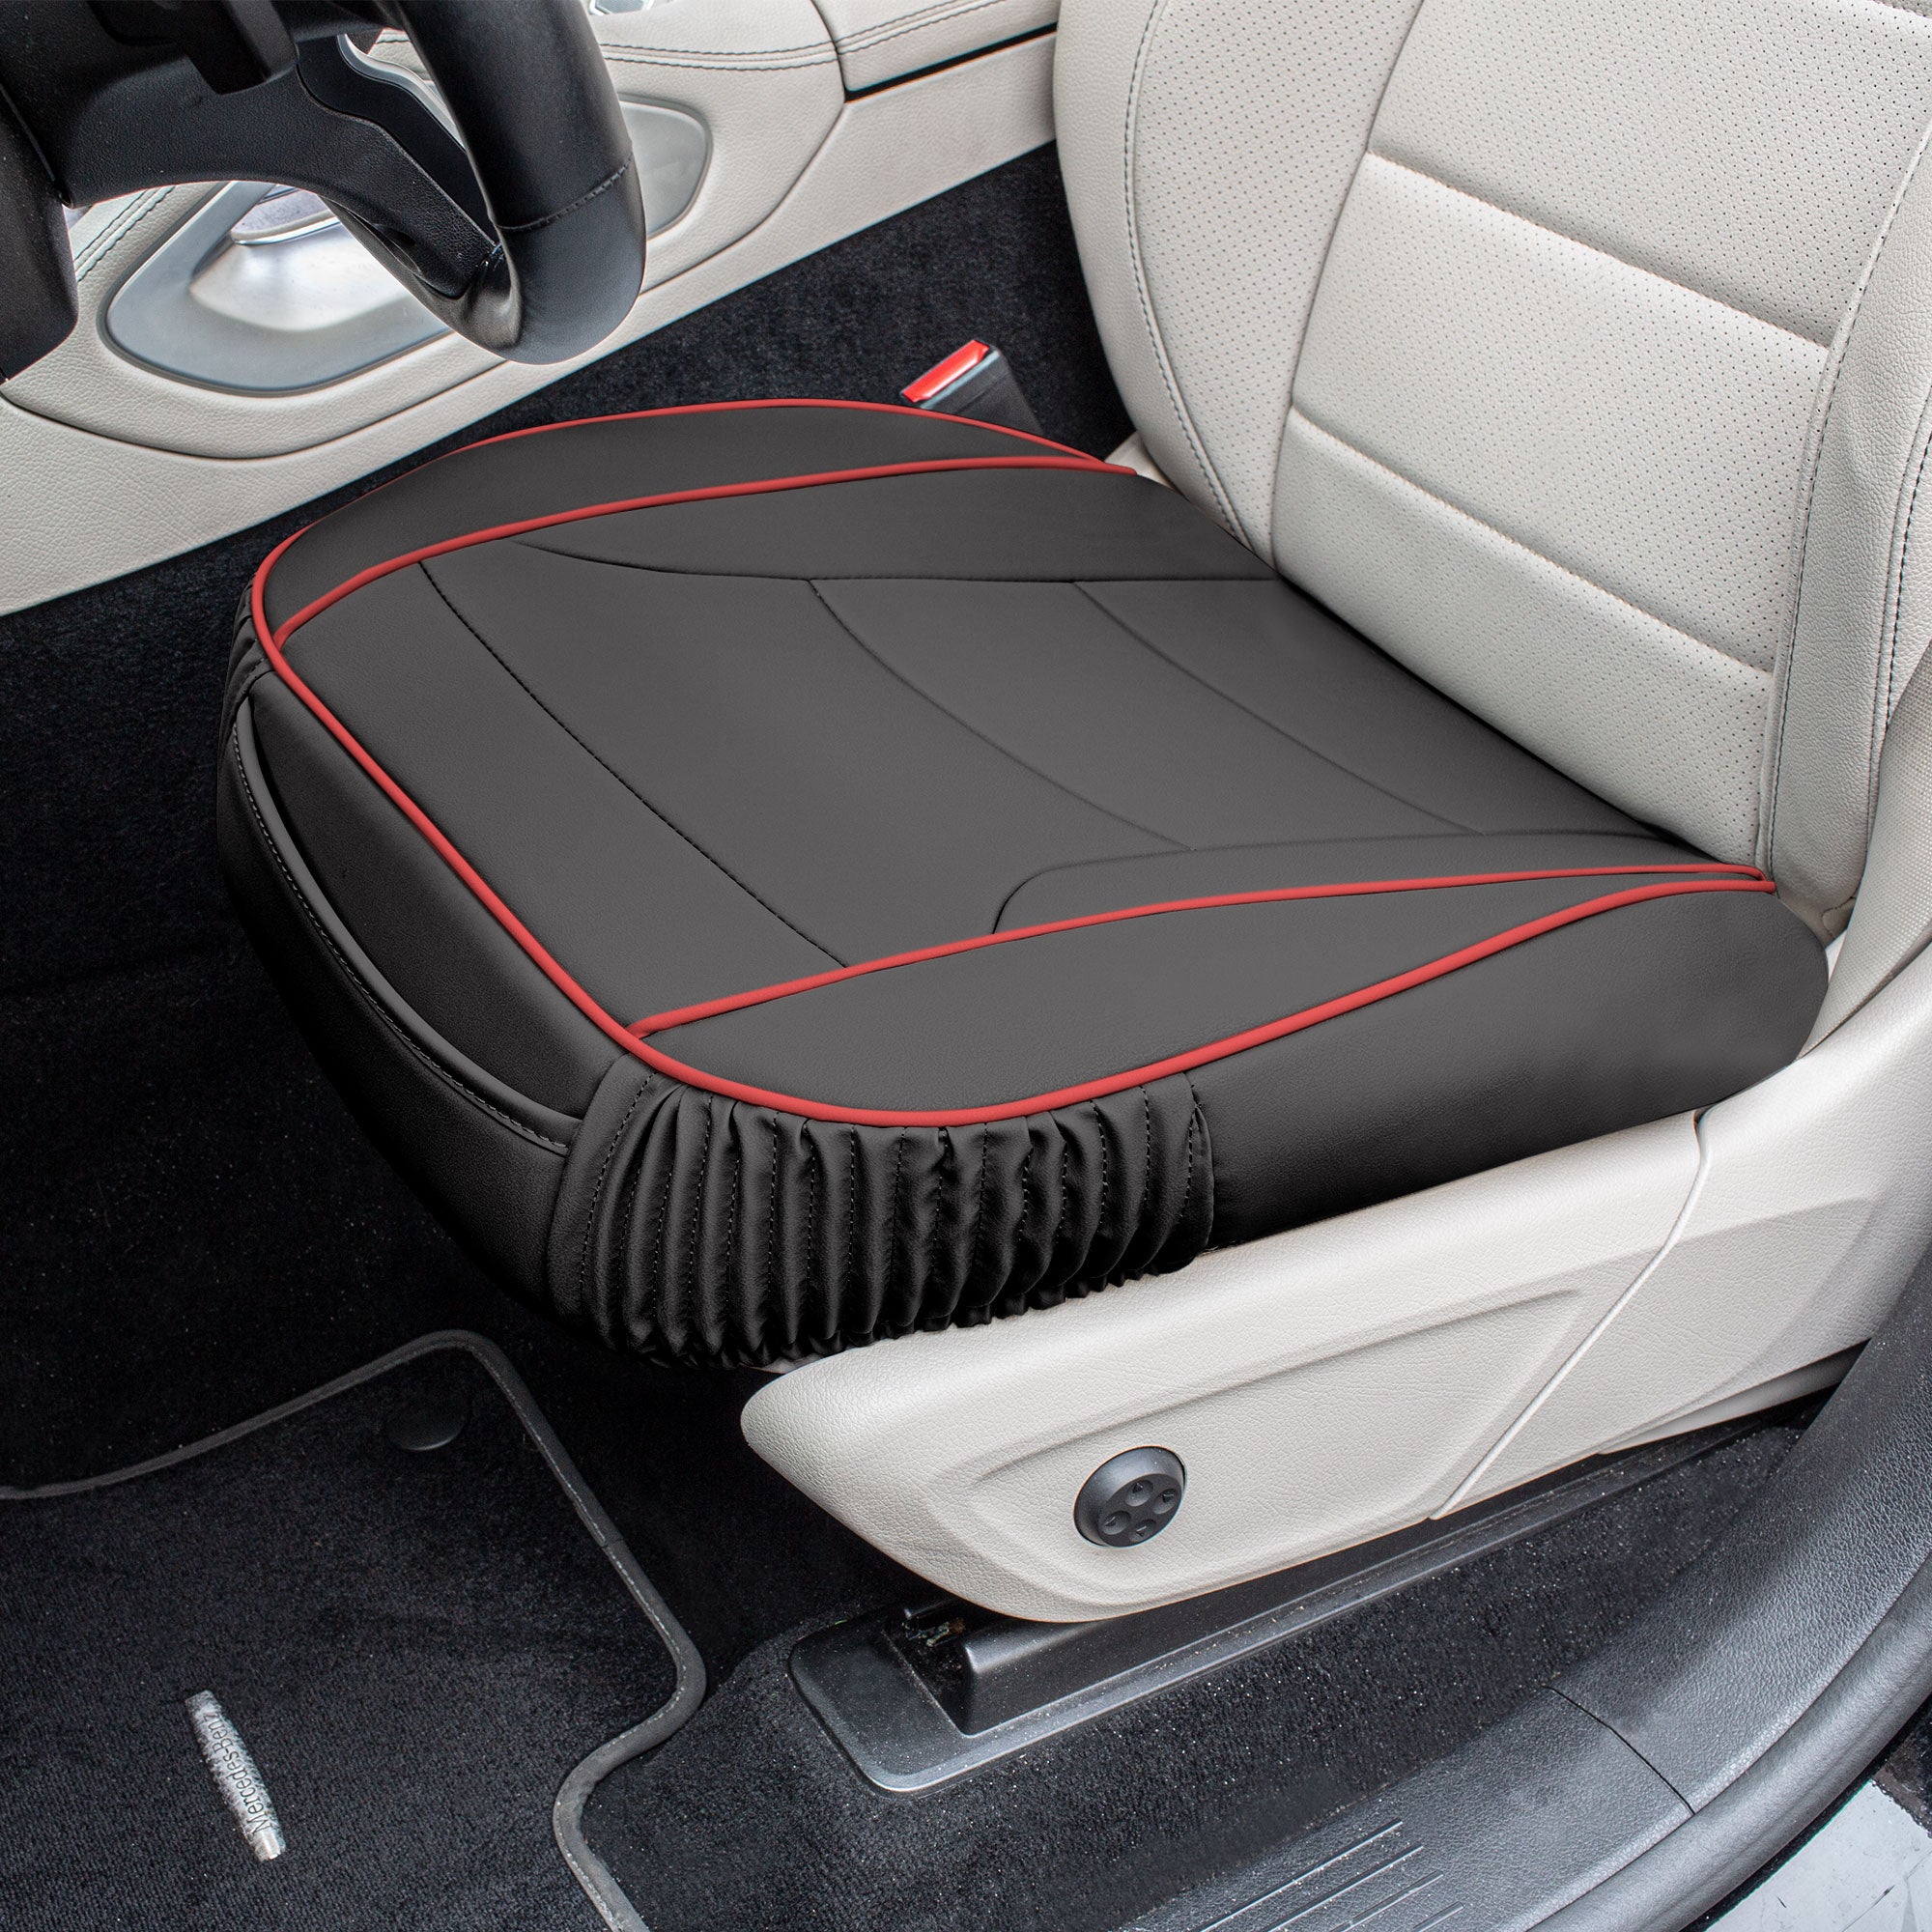 Copy of Faux Leather Seat Cushion Pad - 2 Piece Front Set Black/Red Trim